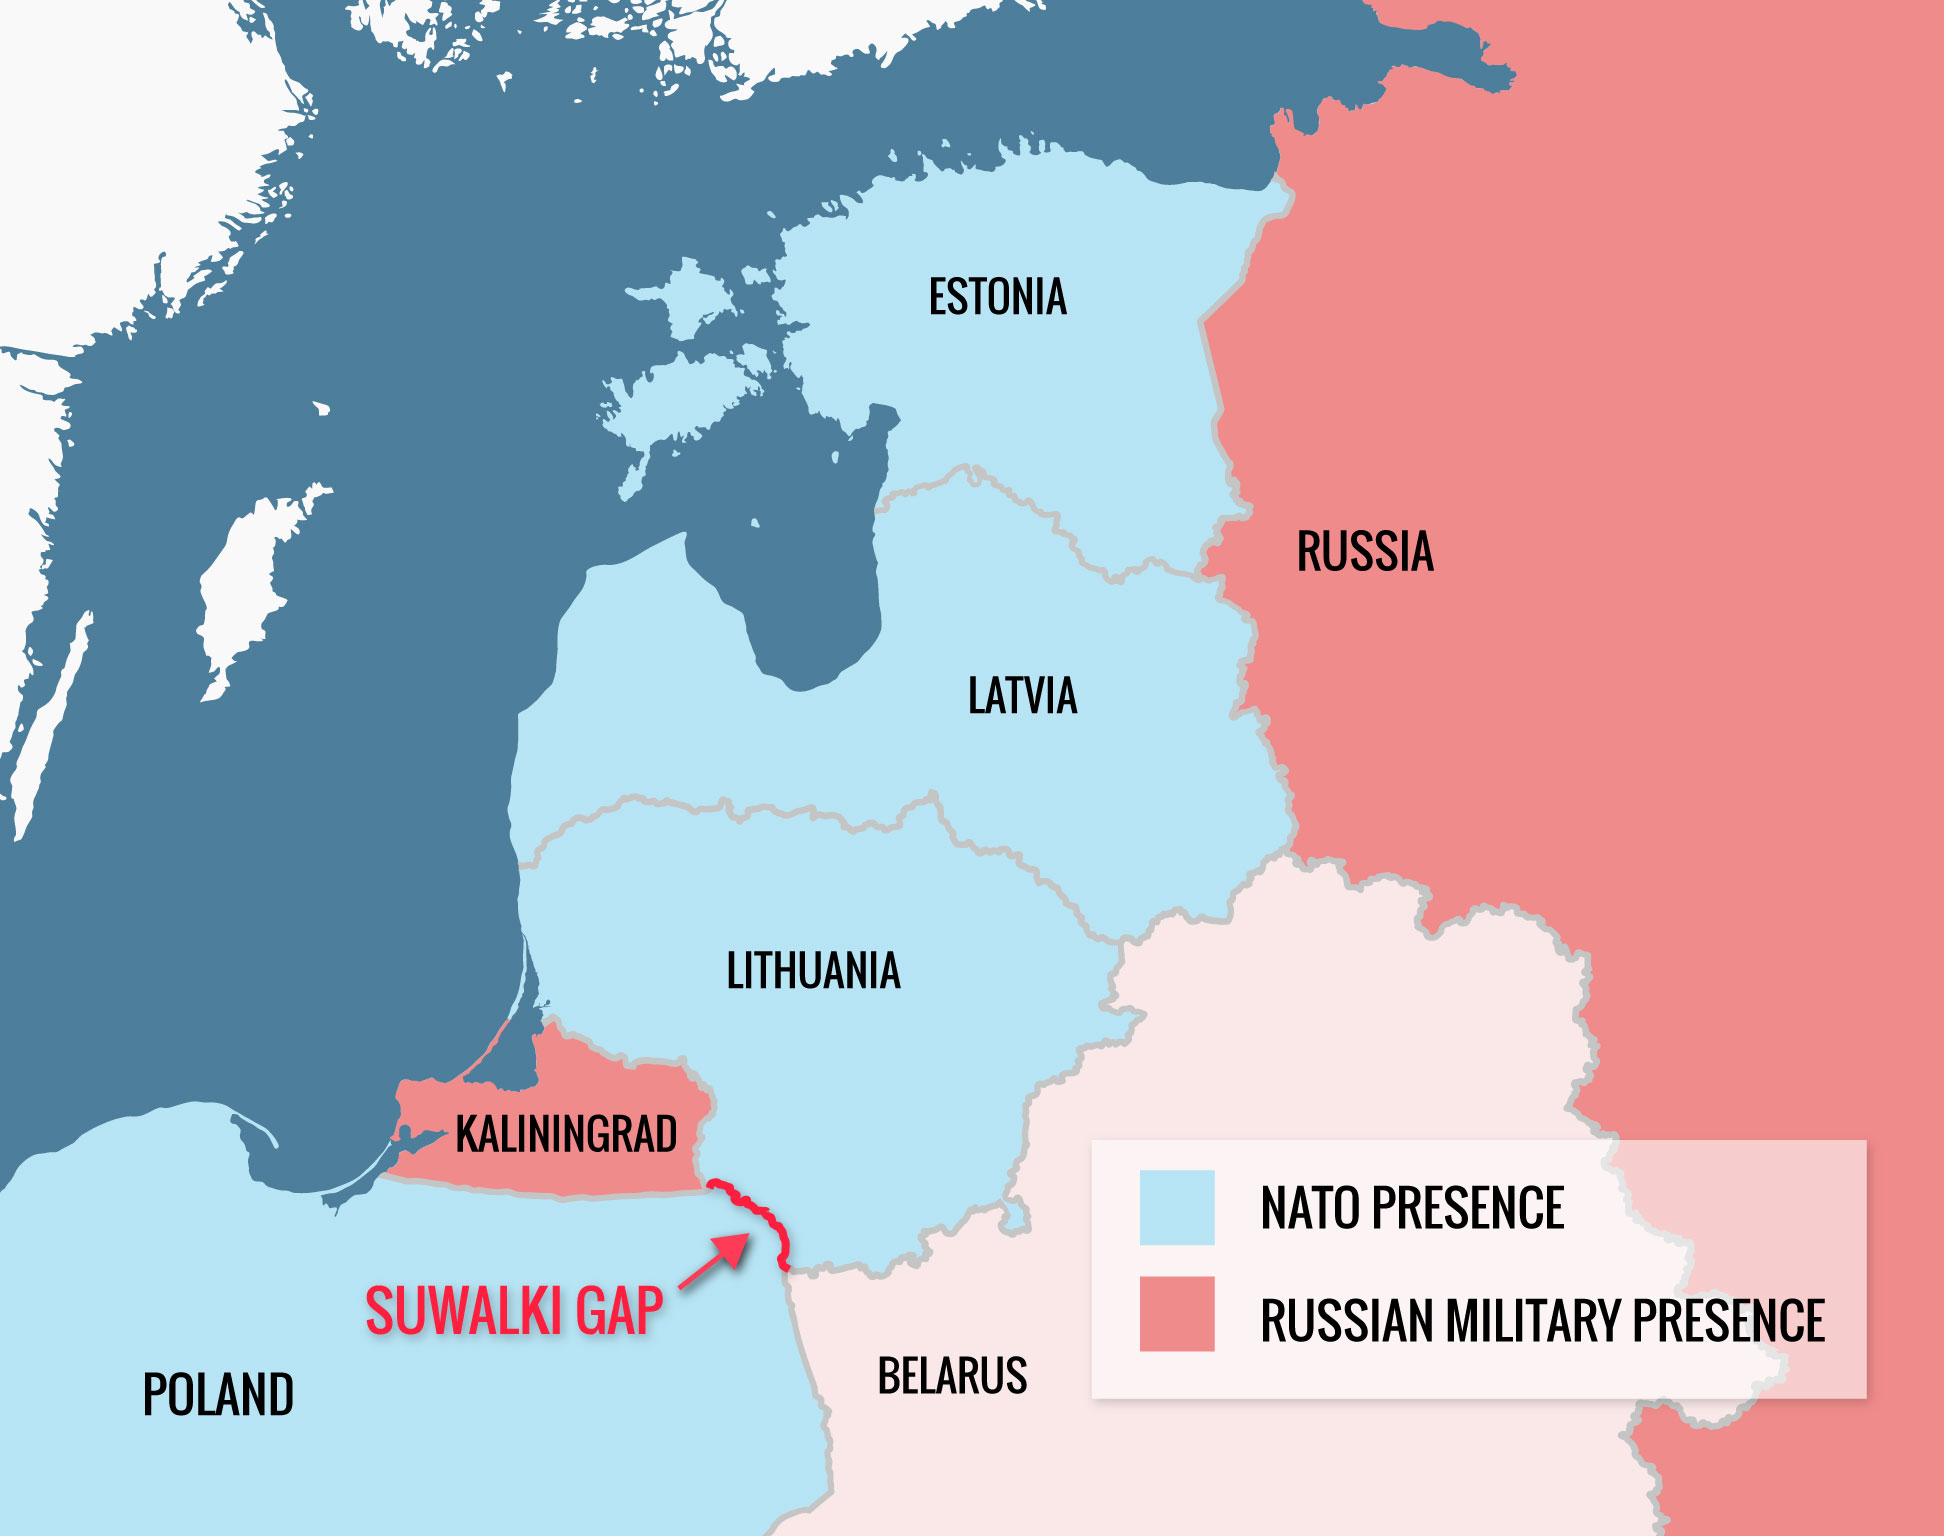 The Suwalki Gap, between Poland and Lithuania, is a growing concern for NATO partners as it exposes the Baltic States to potential isolation should they be cut off due to military action by Russia.